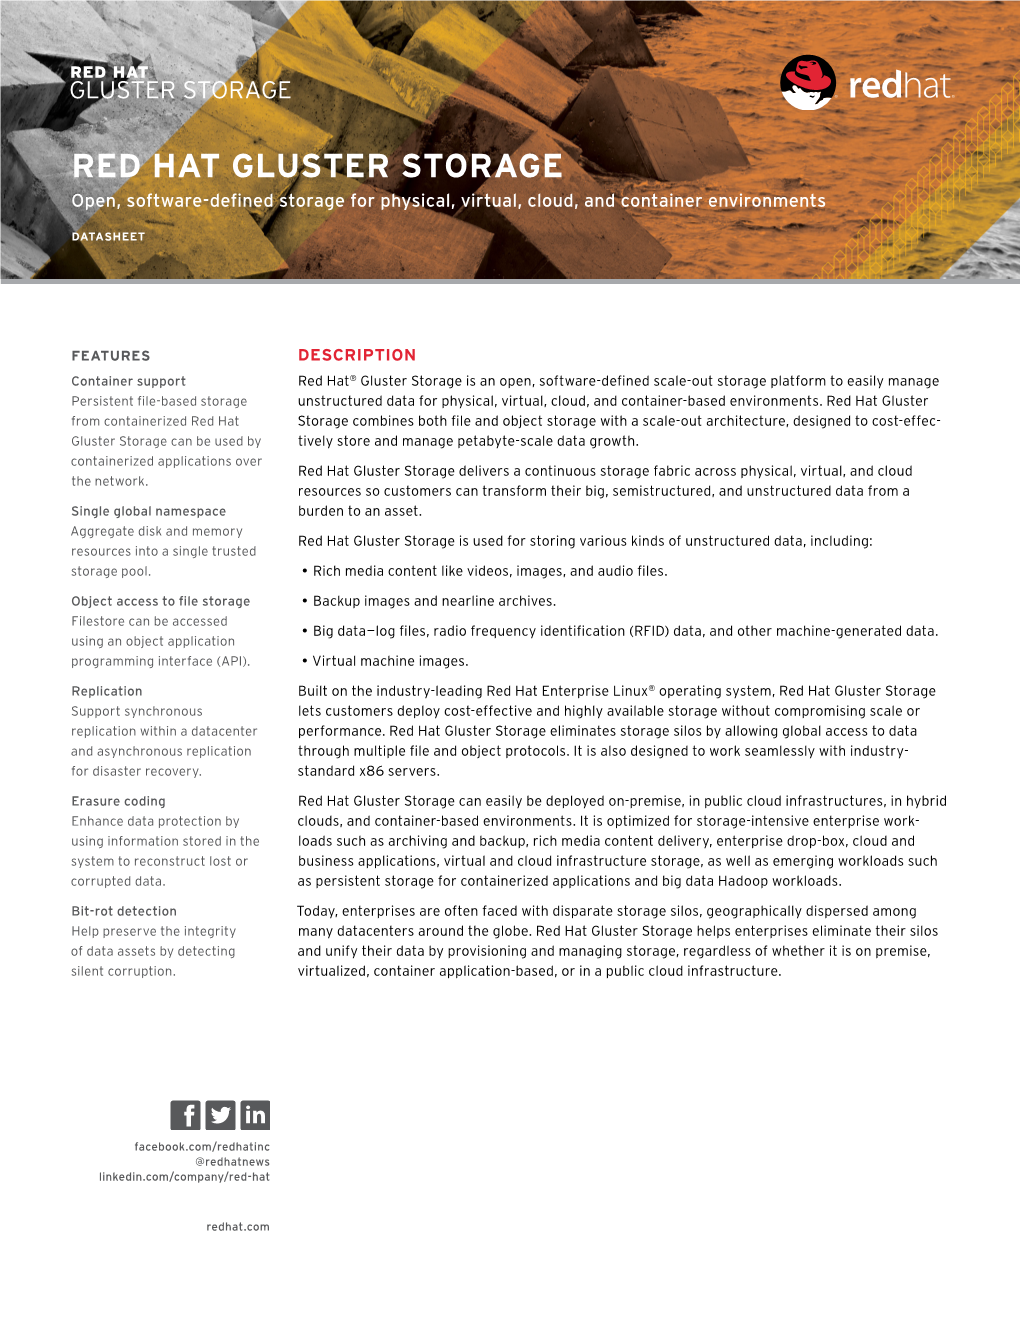 RED HAT GLUSTER STORAGE Open, Software-Defined Storage for Physical, Virtual, Cloud, and Container Environments